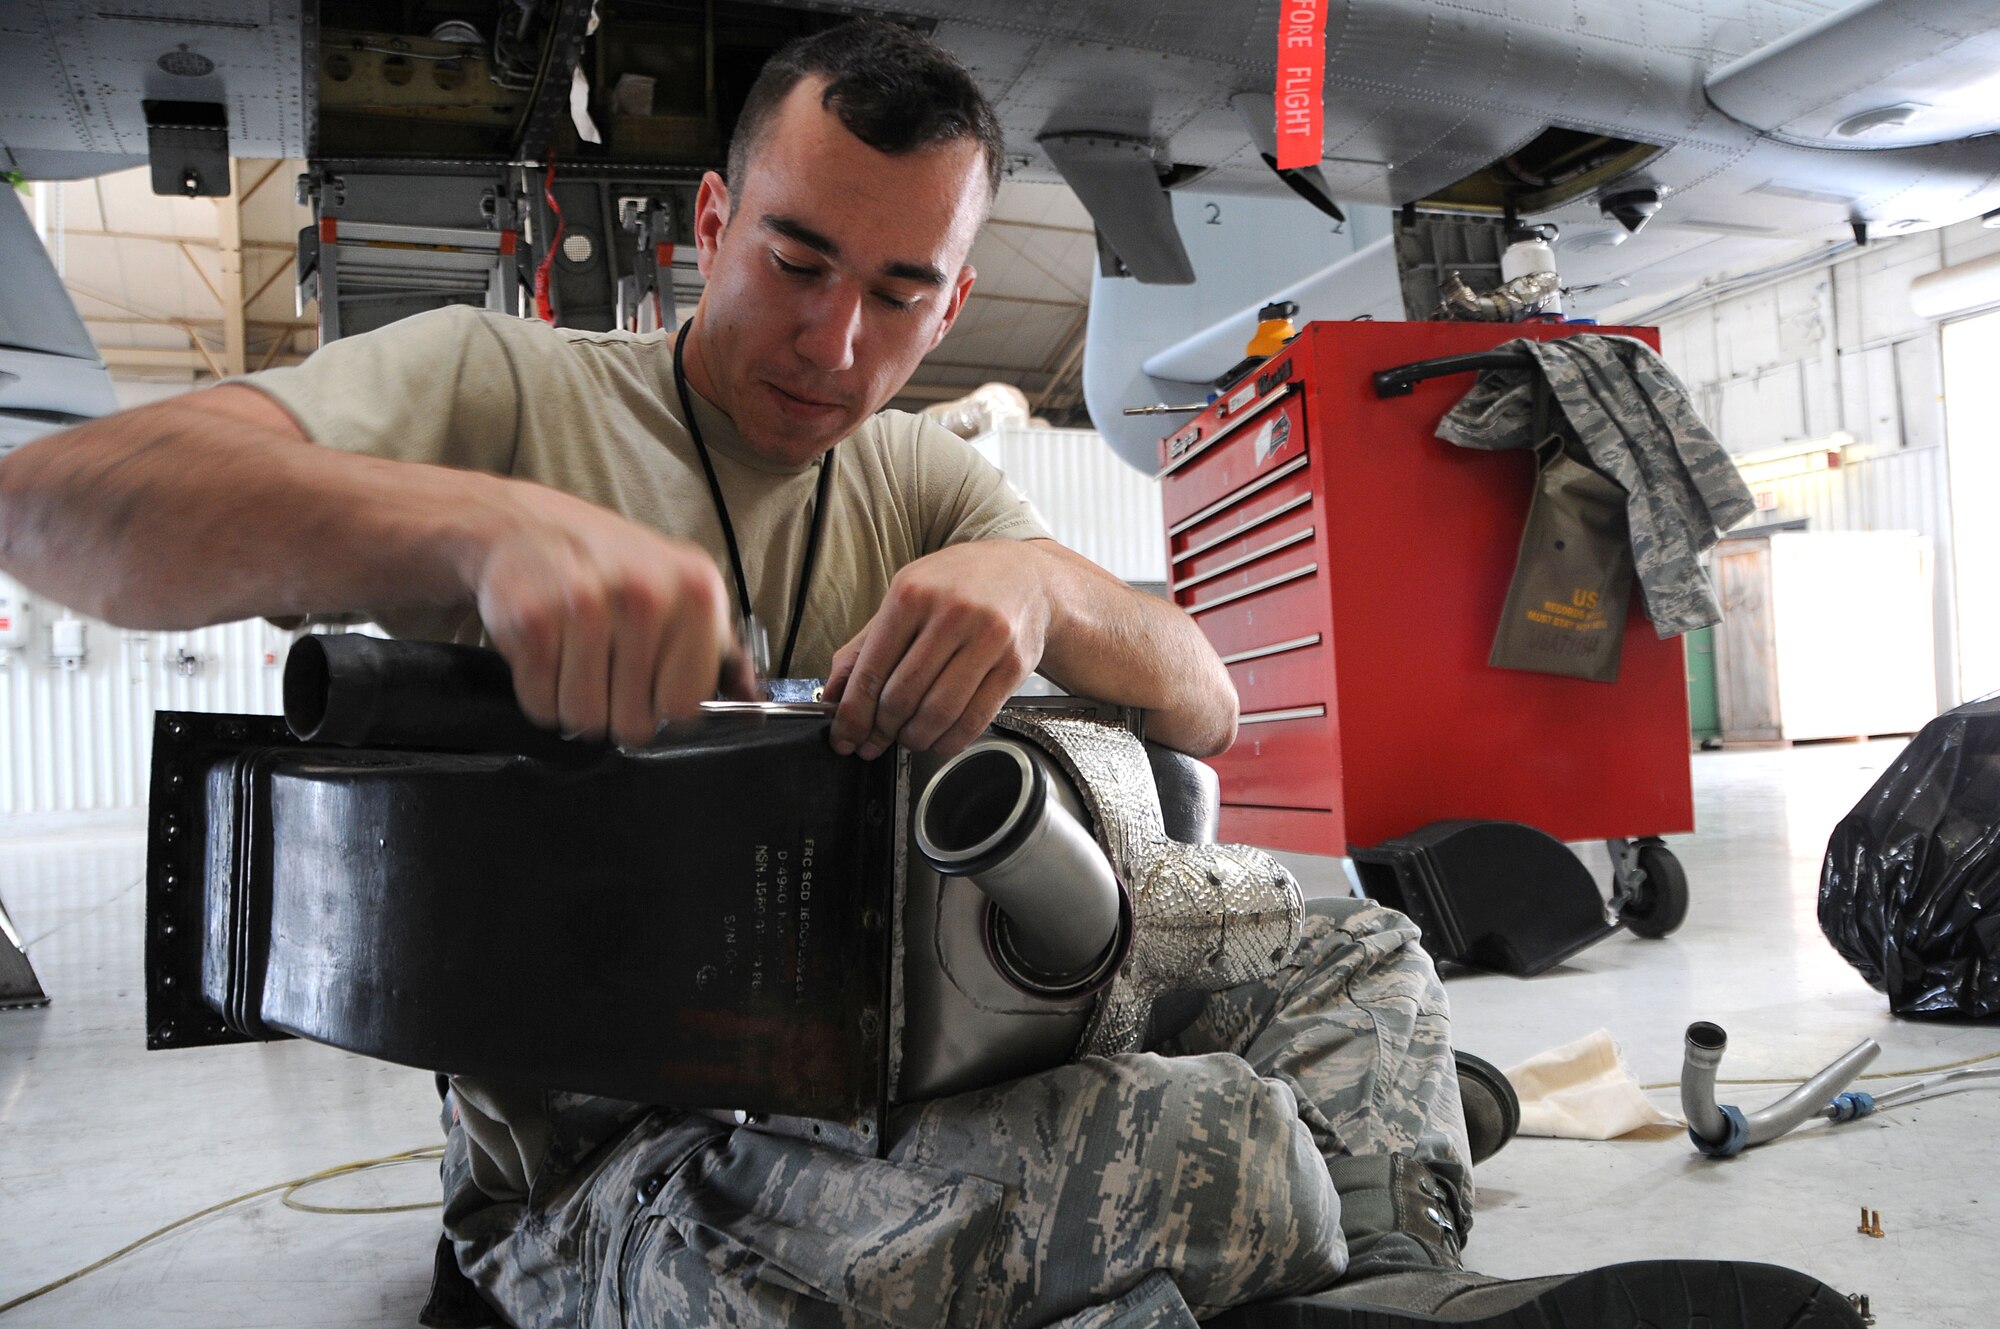 Senior Airman Matthew Gadziala, 924th Fighter Group Electrical and Environmental specialist, replaces the inlet and outlet ducts on a pre-cooler prior to re-installing it on a A-10 Thunderbolt II at Davis-Monthan Air Force Base, Ariz,. Gadziala joined the Air Force for a change of pace however he is still going to school to be a doctor, his ultimate goal. (U.S. Air Force photo by Tech. Sgt. Courtney Richardson)